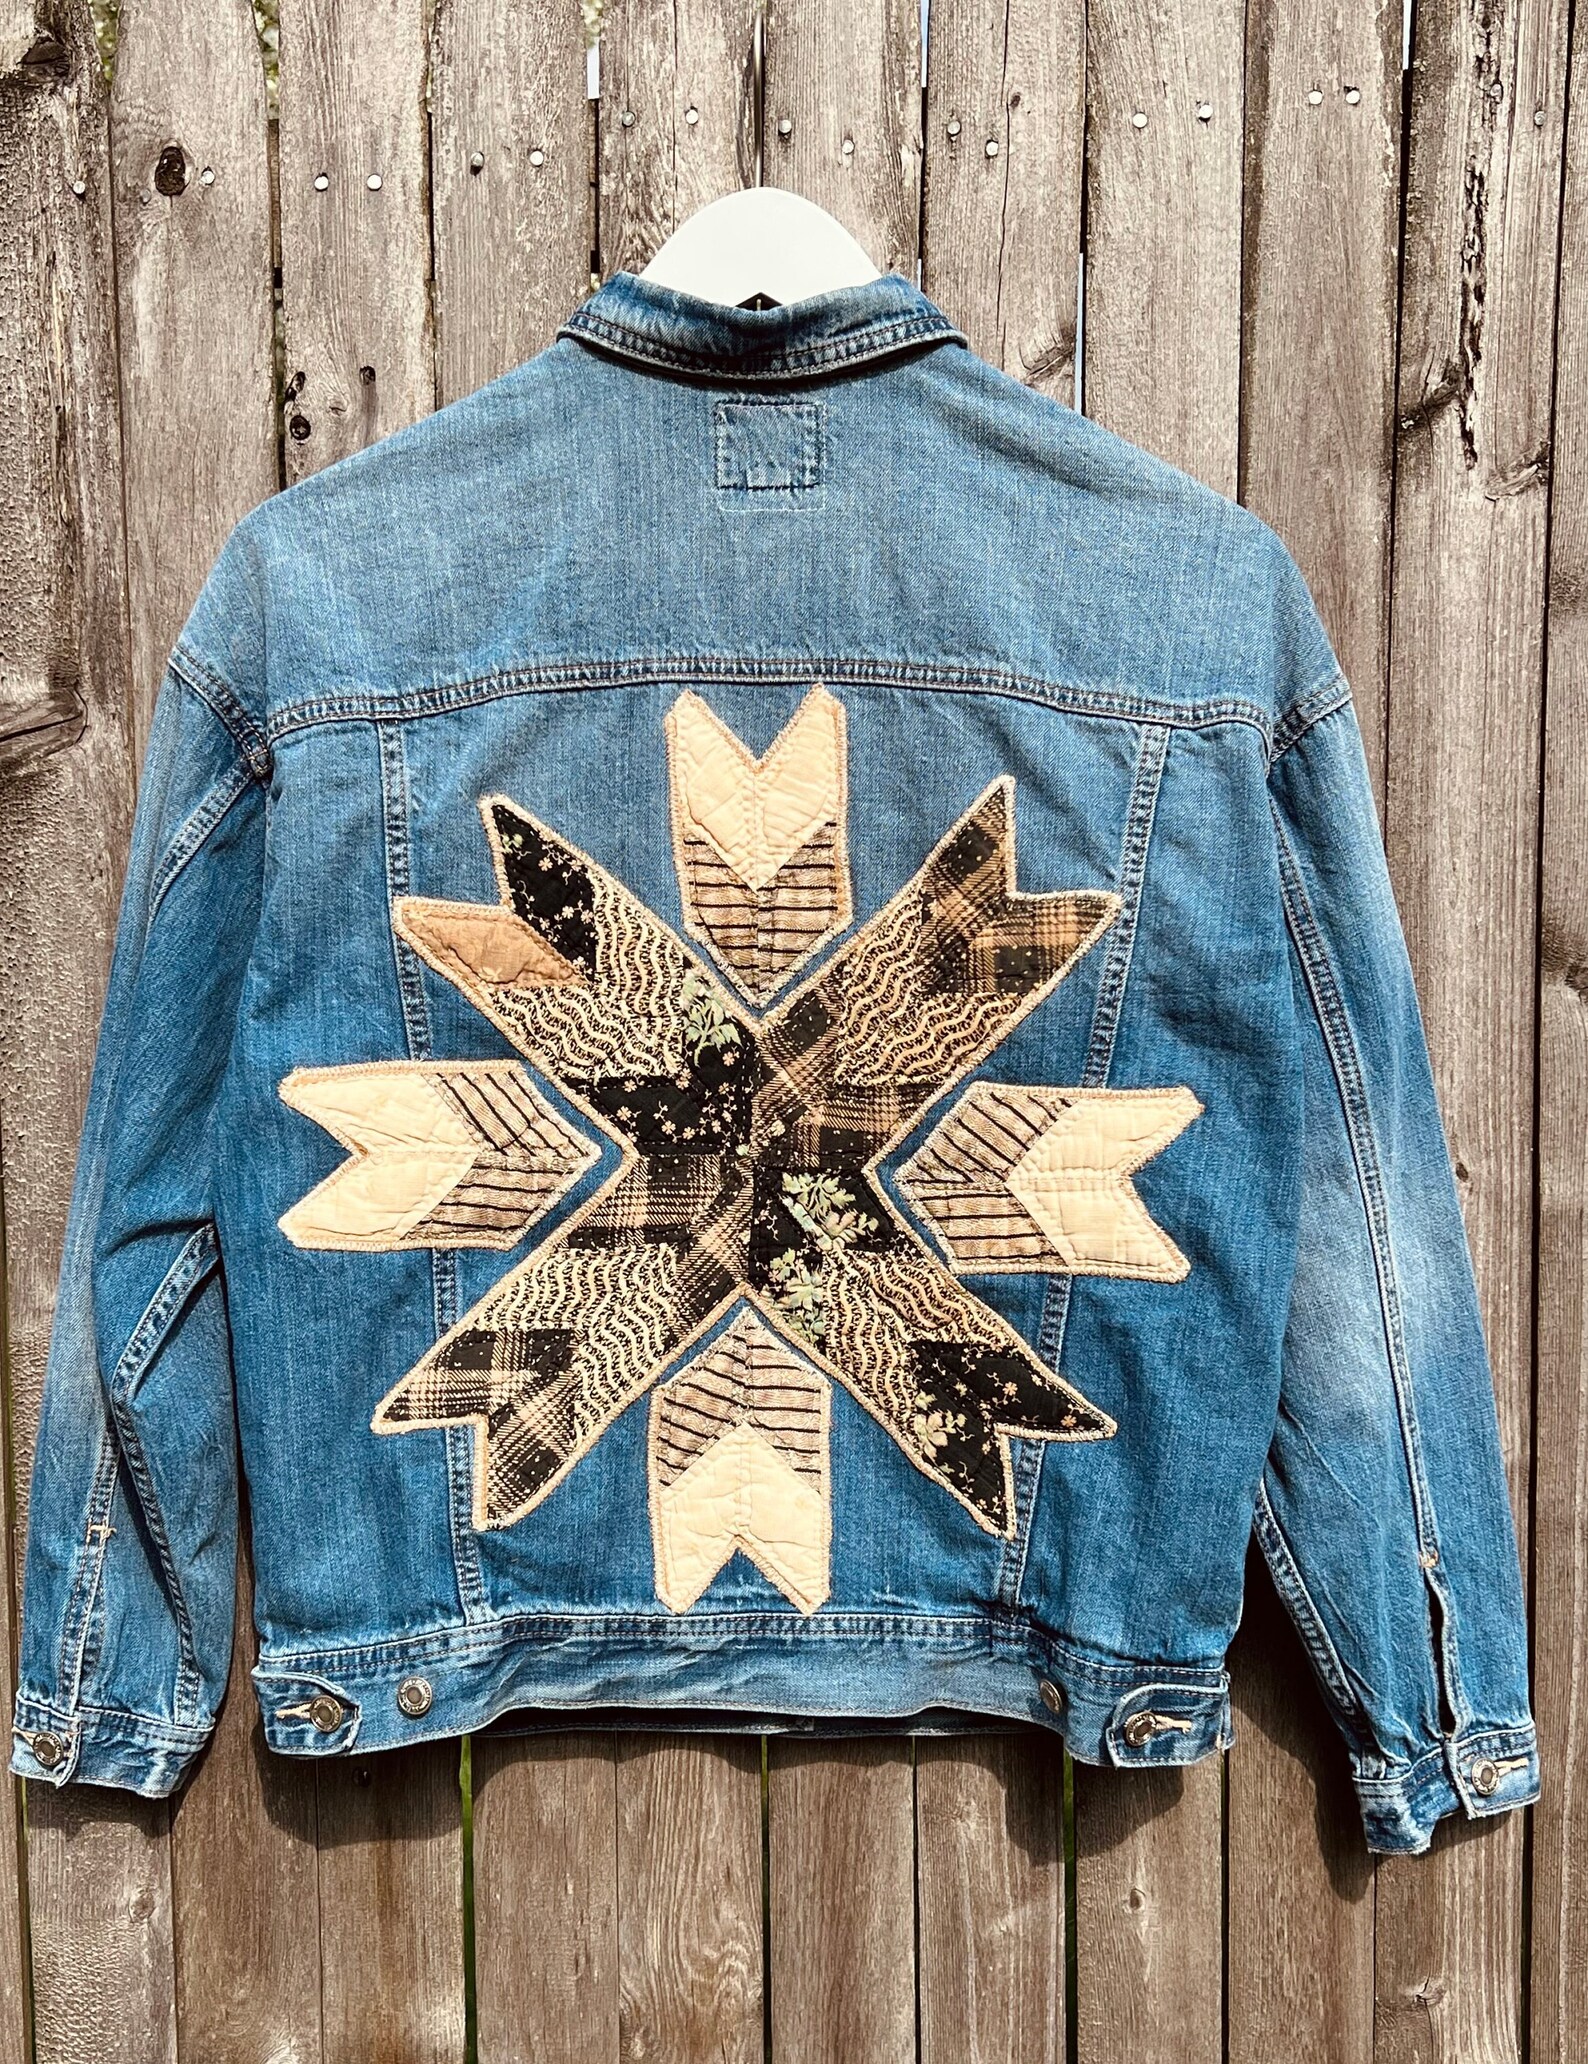 Upcycled Denim Jacket With Vintage Quilt Patch - Etsy